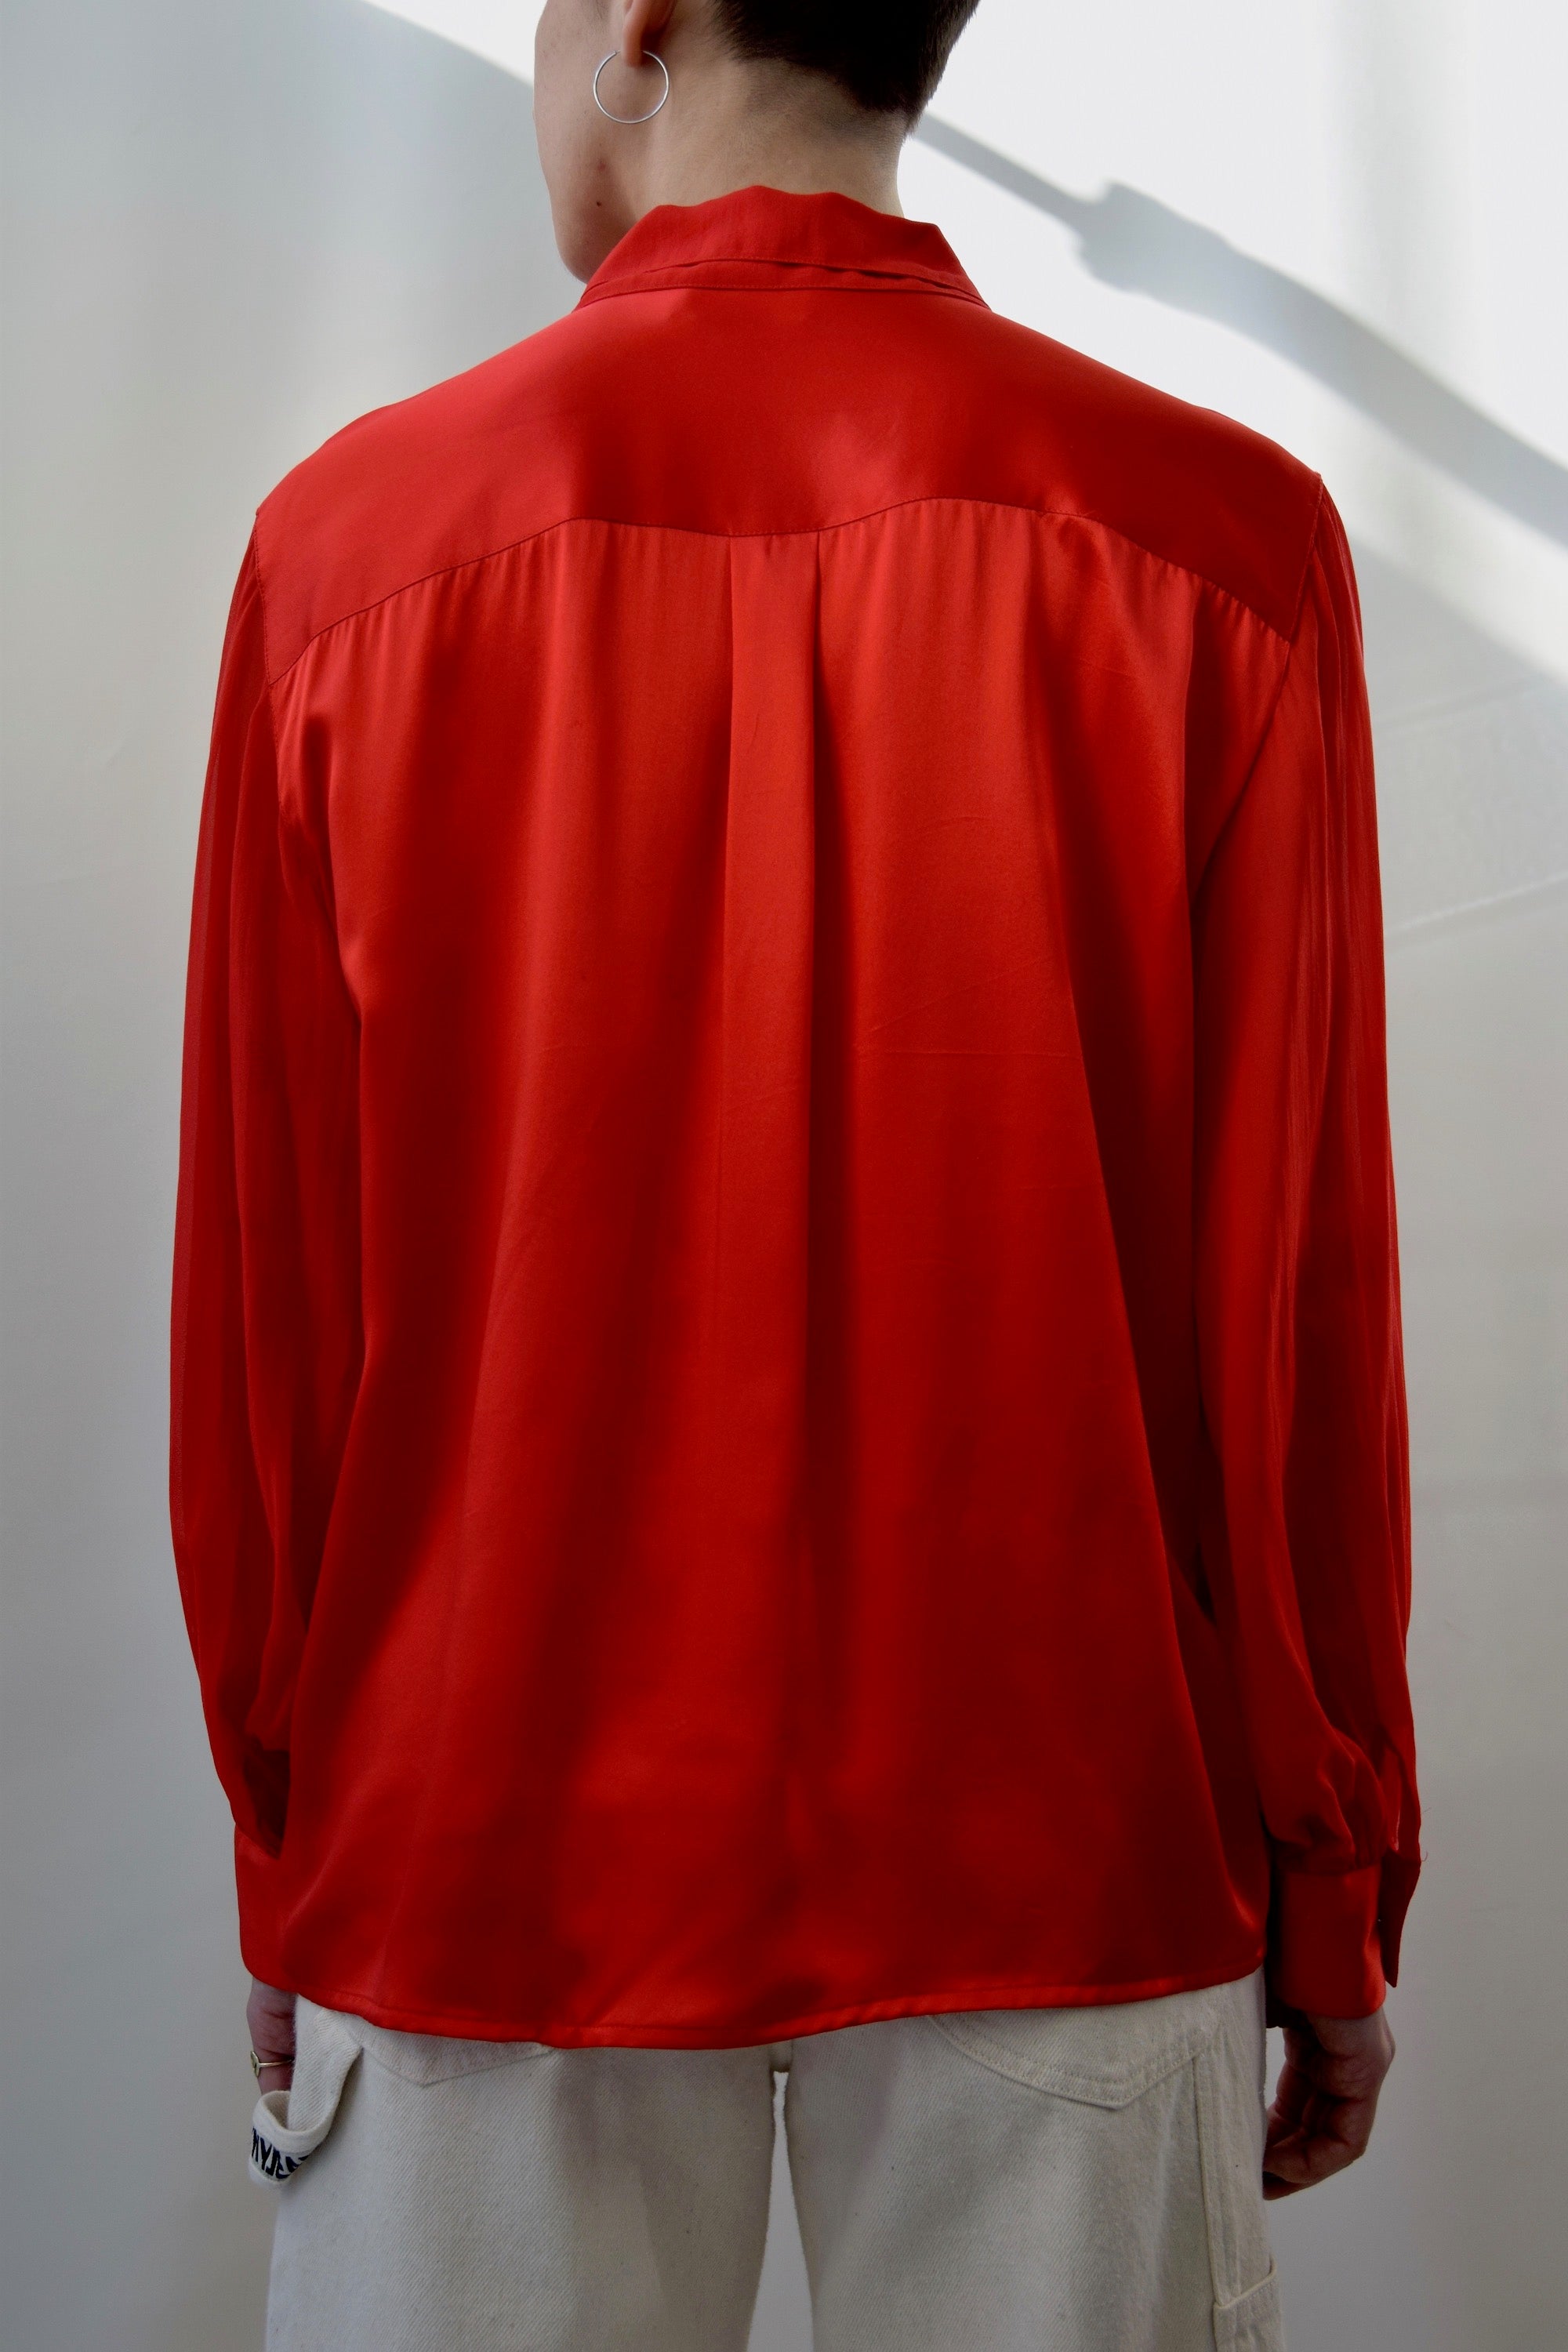 Crimson Red Satin and Sheer Silk Blouse